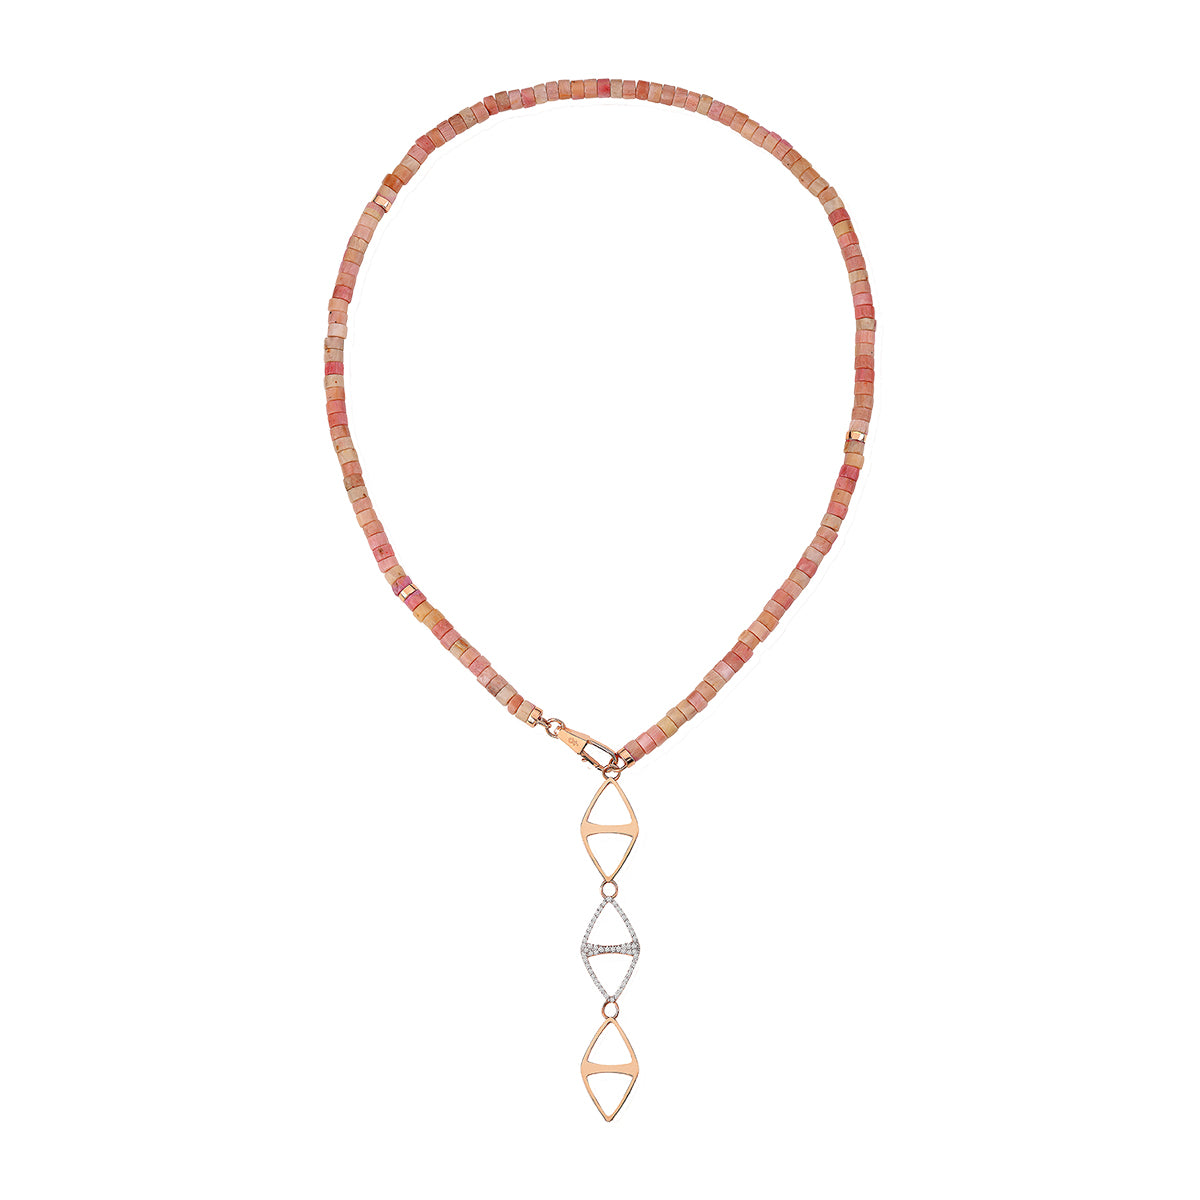 Fusion Stone Necklaces in Rose Gold - Her Story Shop